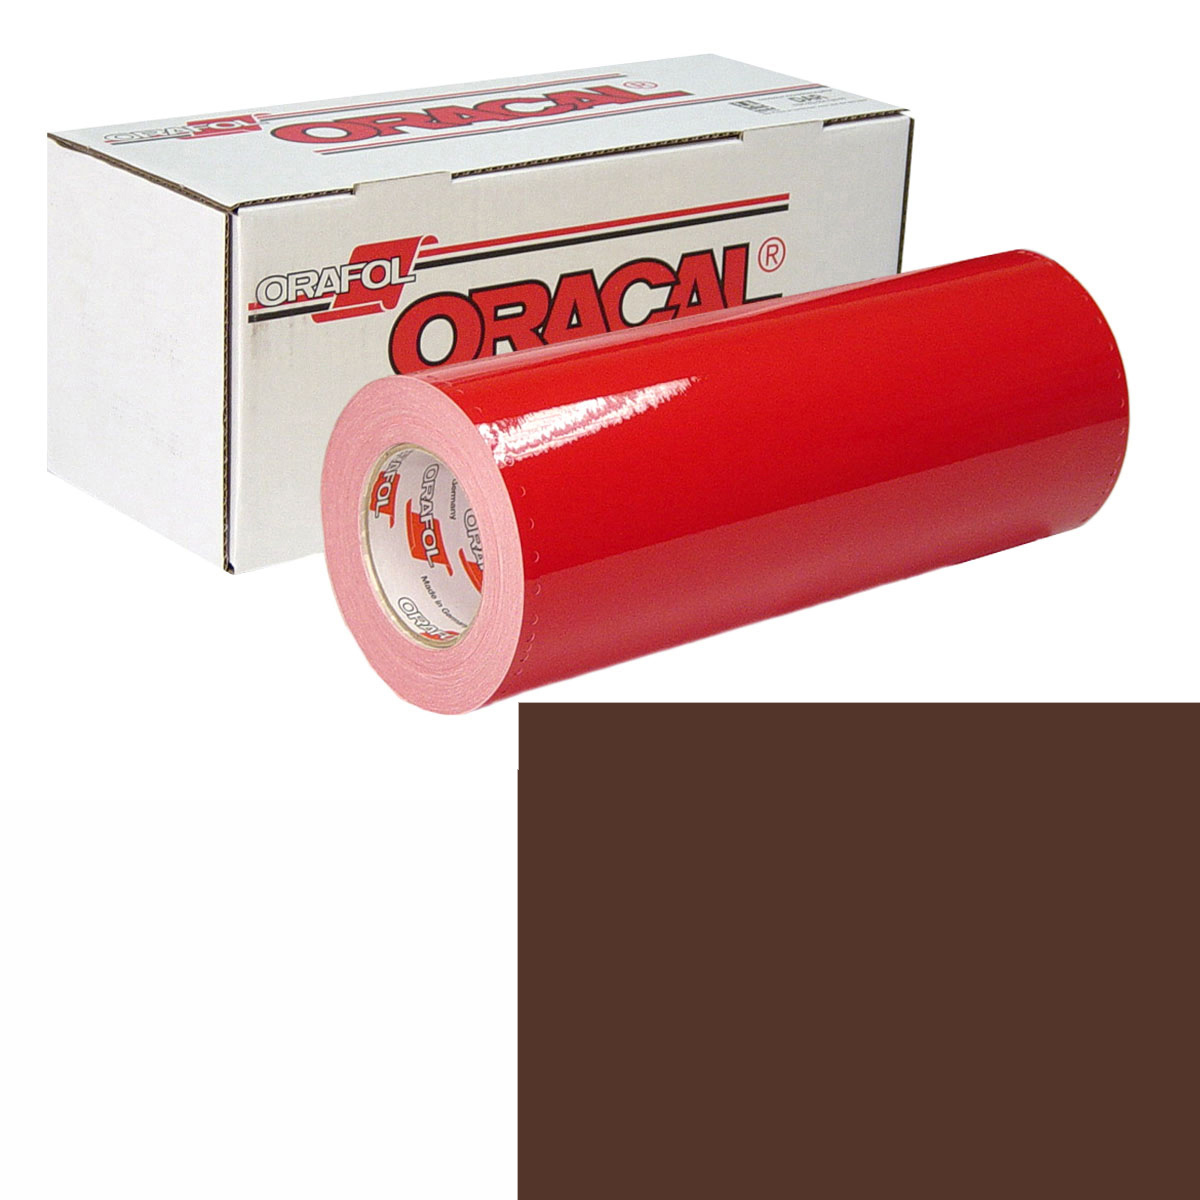 ORACAL 951 Unp 24in X 10yd 810 Cocoa Brown